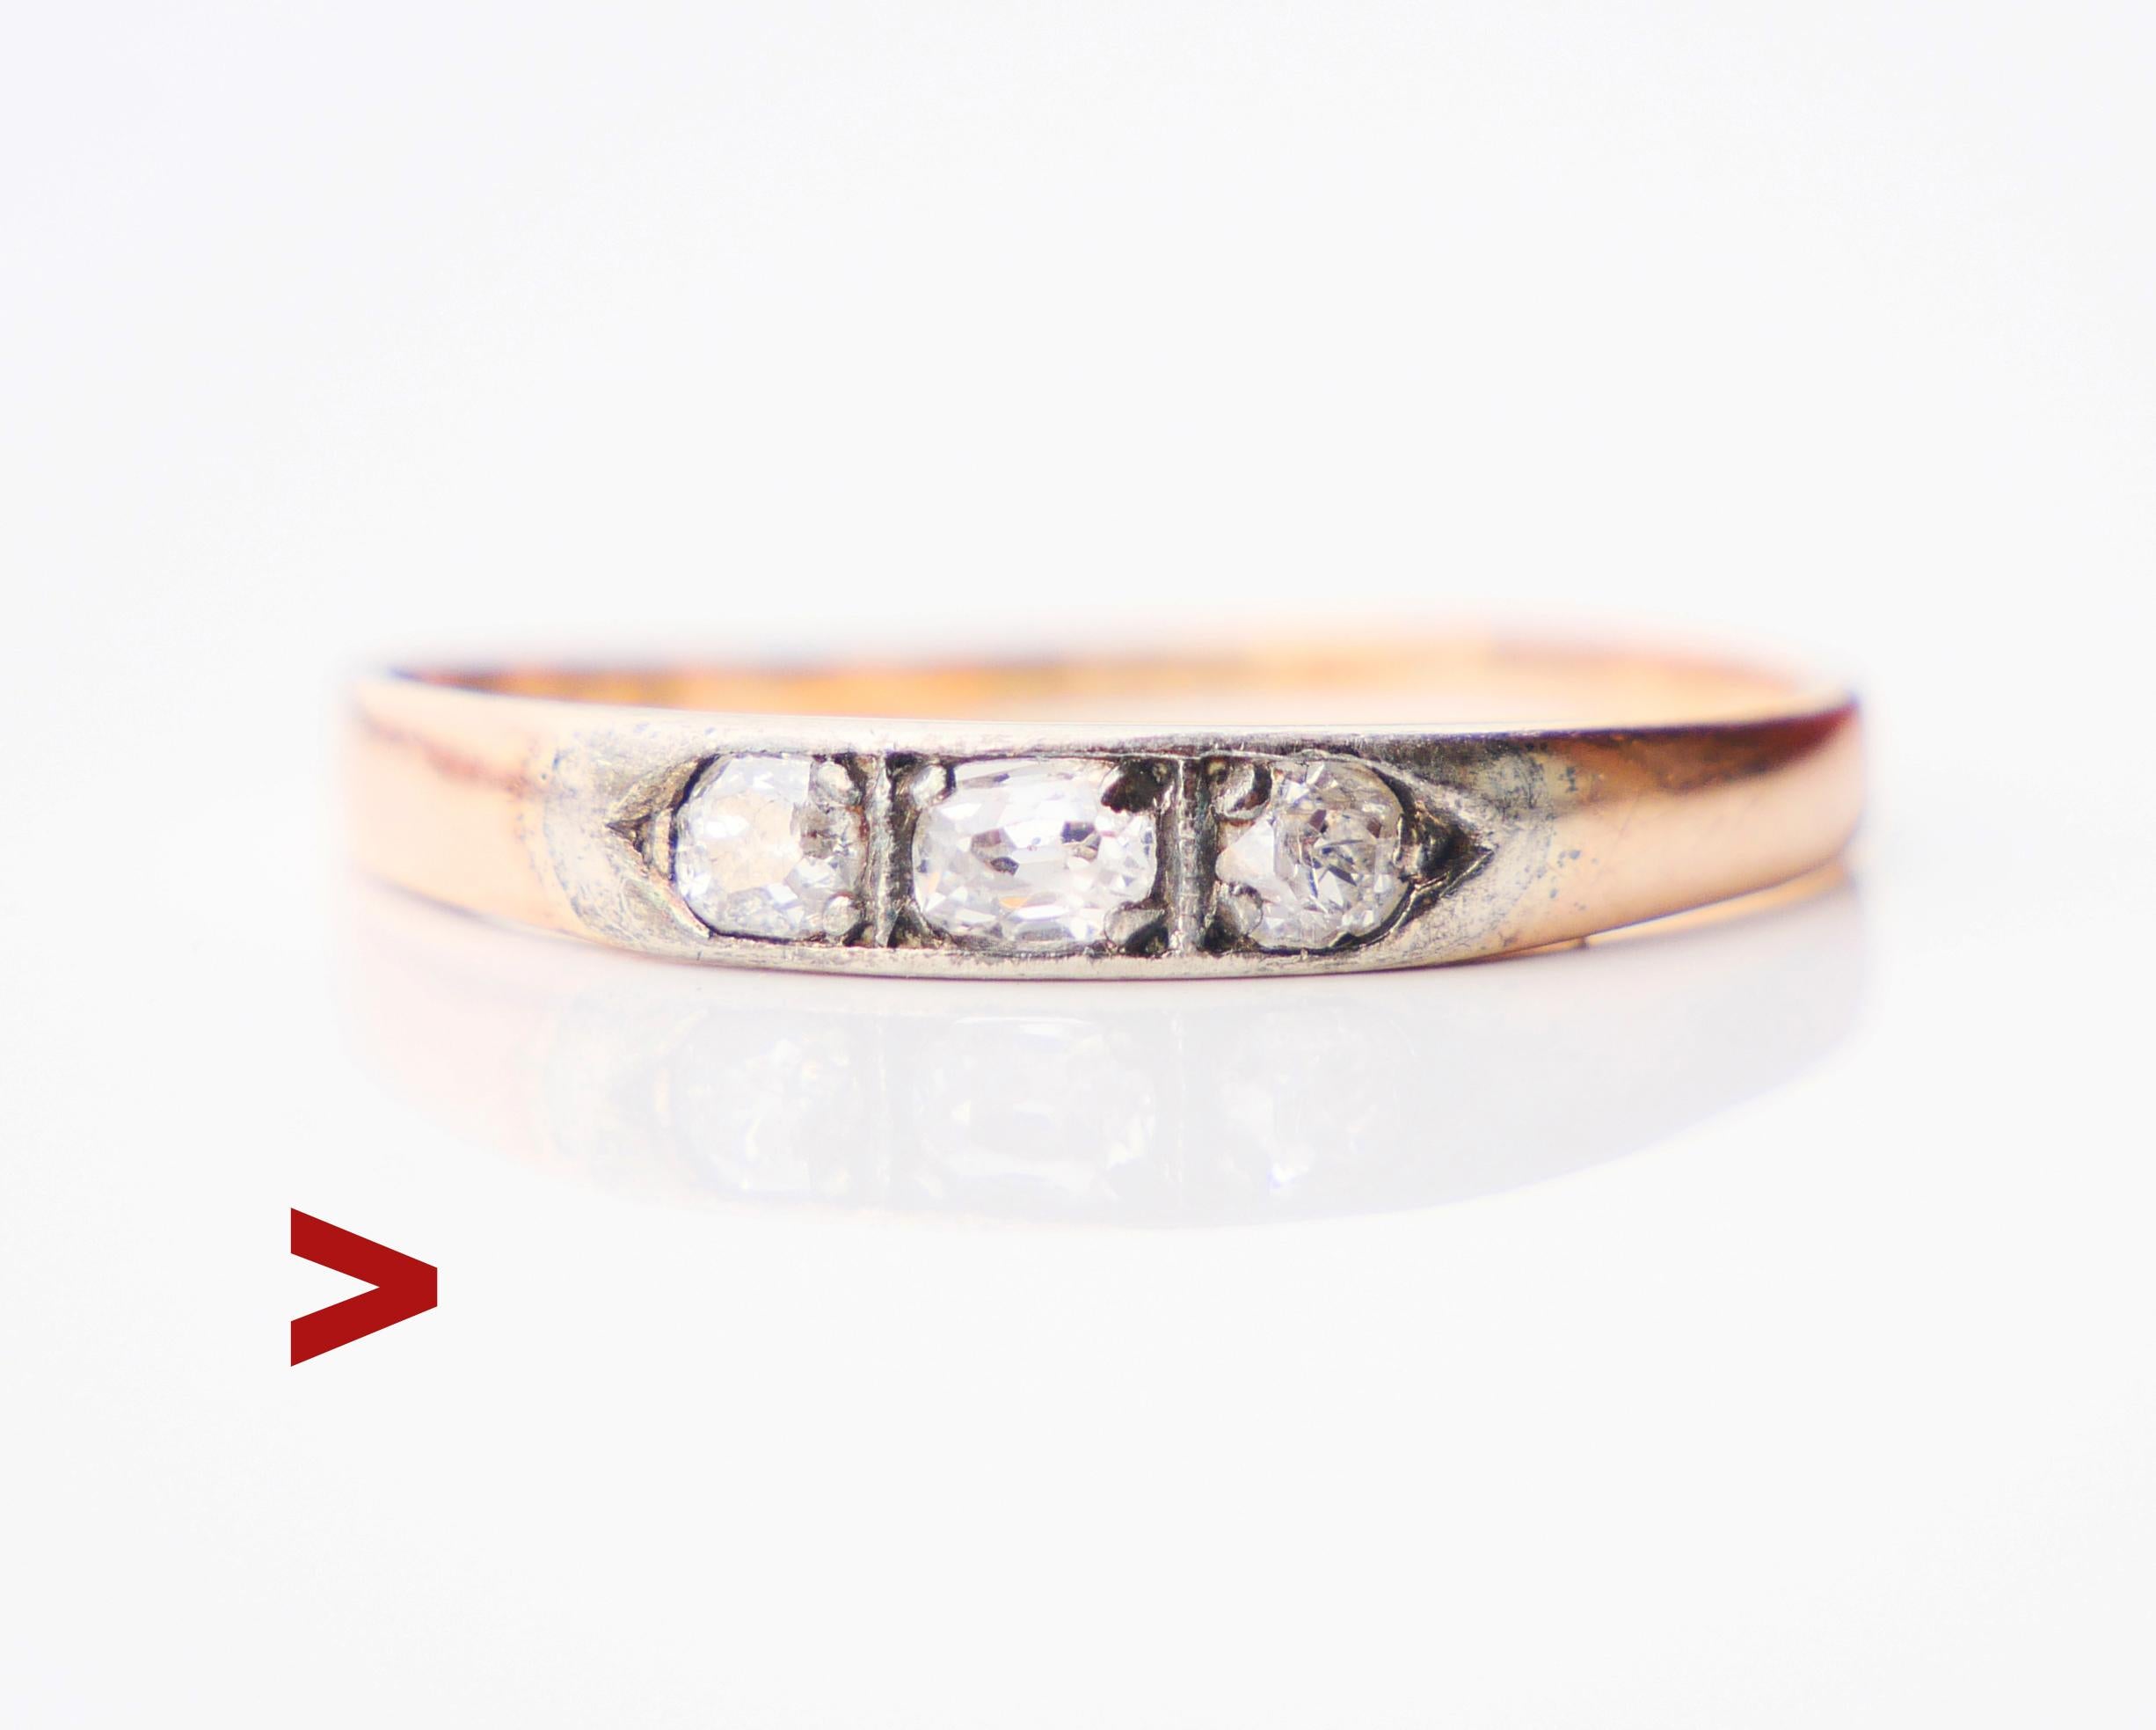 Old Finish Ring with 3 old European cut Diamonds, band in solid 14K Rose Gold with White Gold / or Silver clusters.

Finish hallmarks, 585 ,maker's. Date combination N6 / created in 1942.

Largest central Diamond old European oval cut 3.25 mm x 2.5